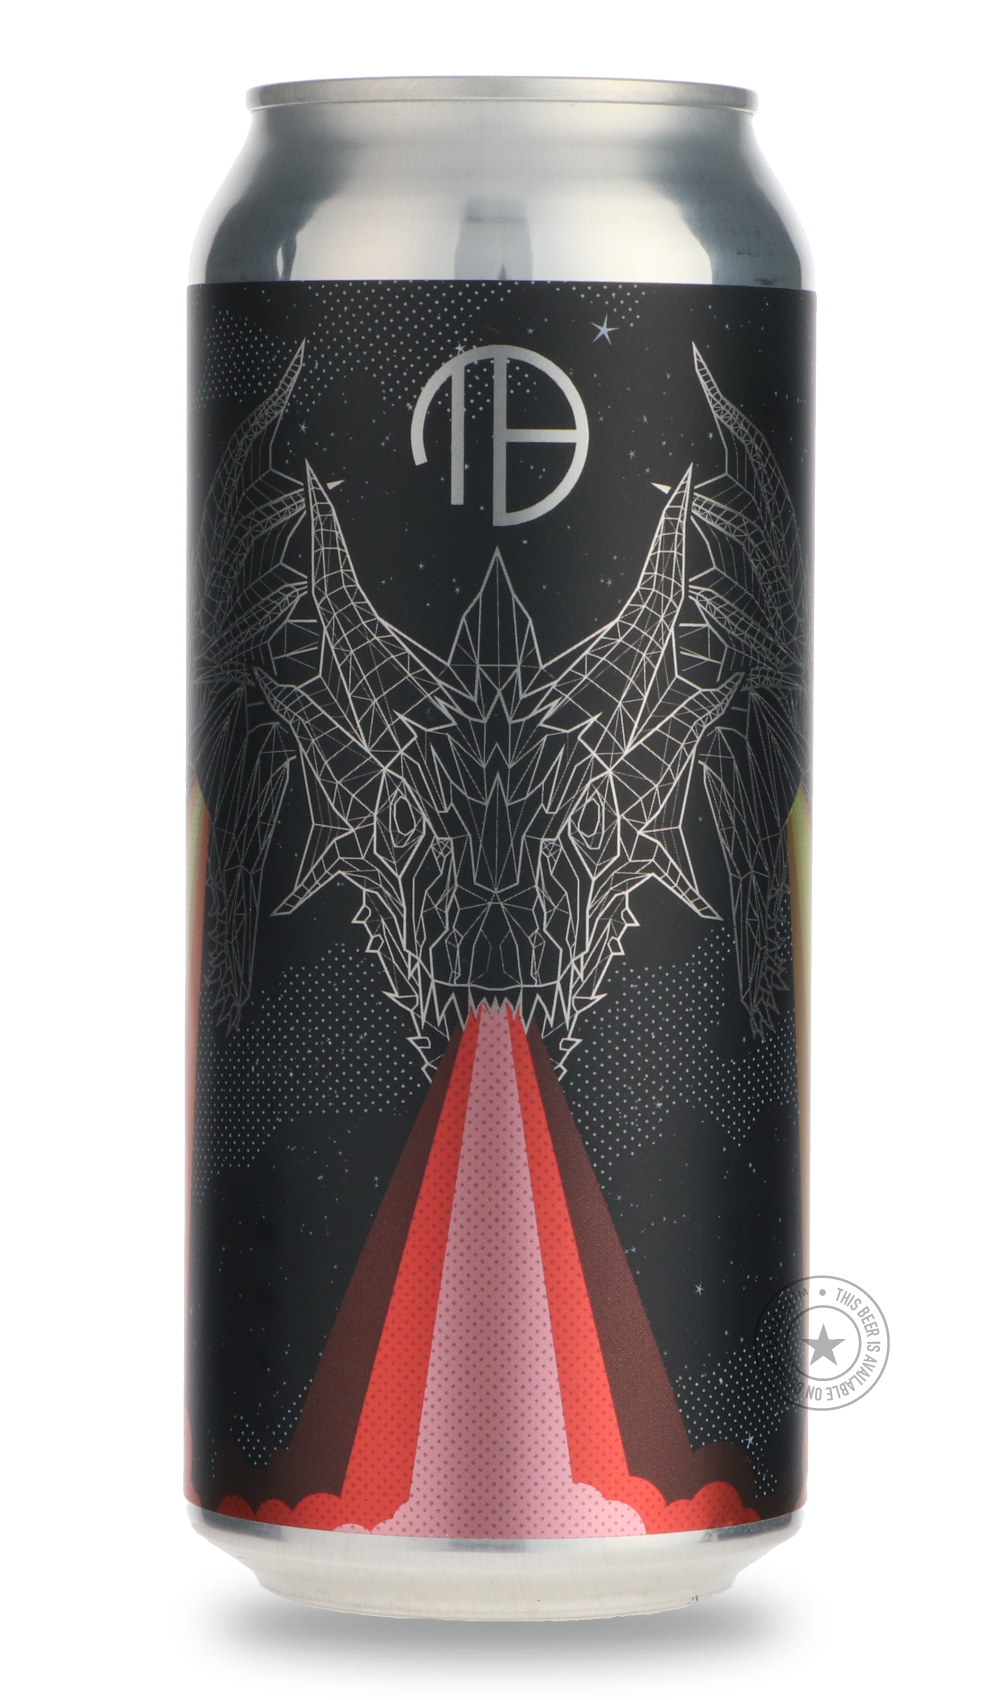 -Mortalis- Hydra | Strawberry + Peach + Pineapple-Sour / Wild & Fruity- Only @ Beer Republic - The best online beer store for American & Canadian craft beer - Buy beer online from the USA and Canada - Bier online kopen - Amerikaans bier kopen - Craft beer store - Craft beer kopen - Amerikanisch bier kaufen - Bier online kaufen - Acheter biere online - IPA - Stout - Porter - New England IPA - Hazy IPA - Imperial Stout - Barrel Aged - Barrel Aged Imperial Stout - Brown - Dark beer - Blond - Blonde - Pilsner -